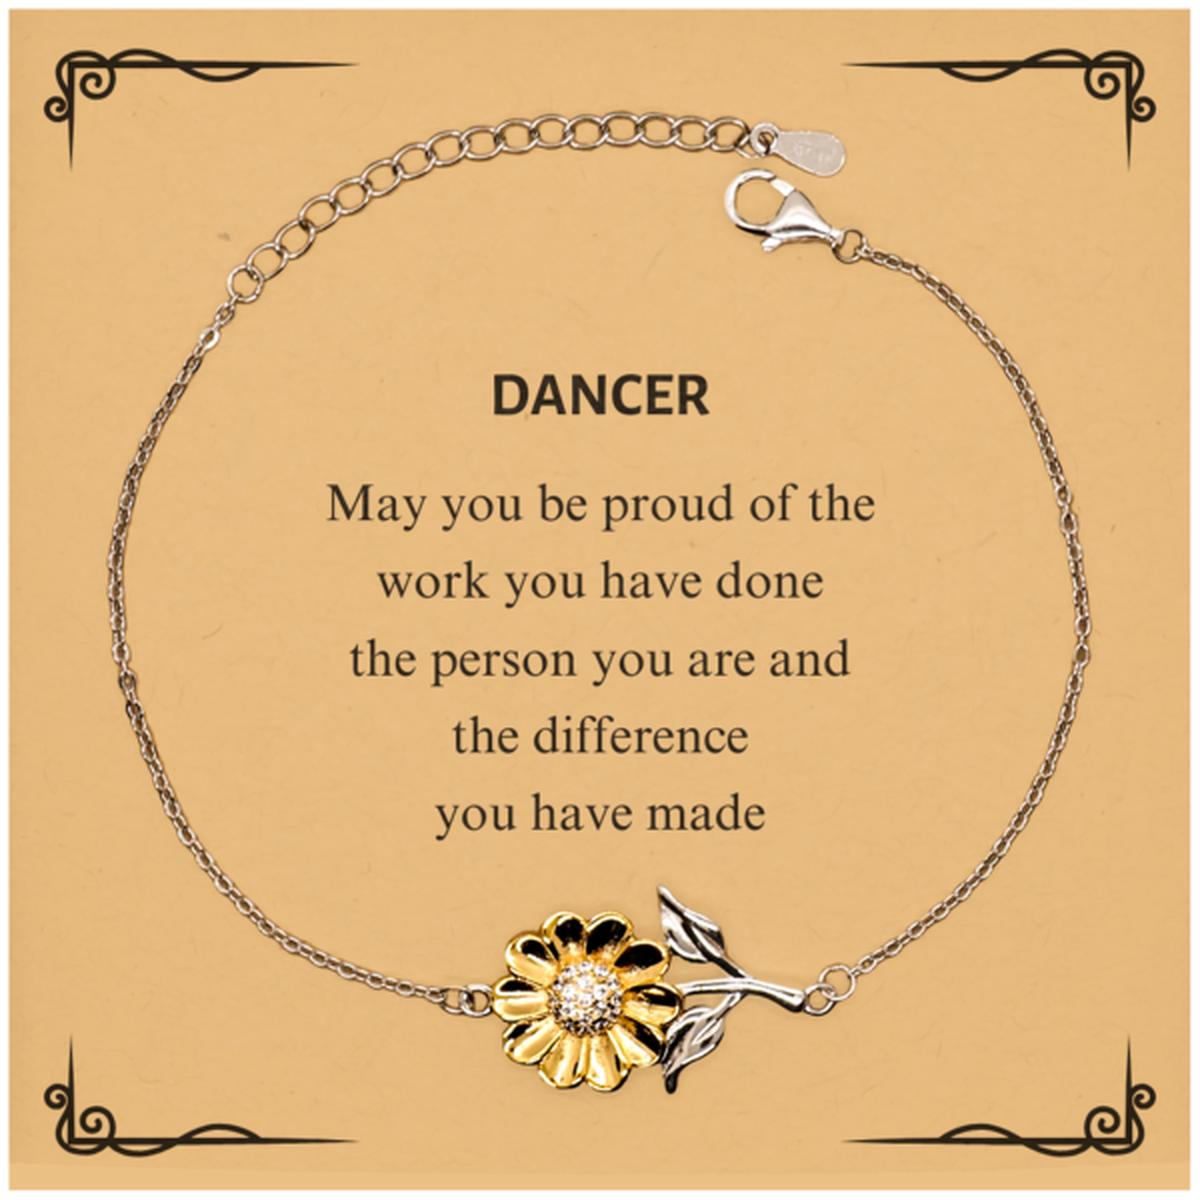 Dancer May you be proud of the work you have done, Retirement Dancer Sunflower Bracelet for Colleague Appreciation Gifts Amazing for Dancer